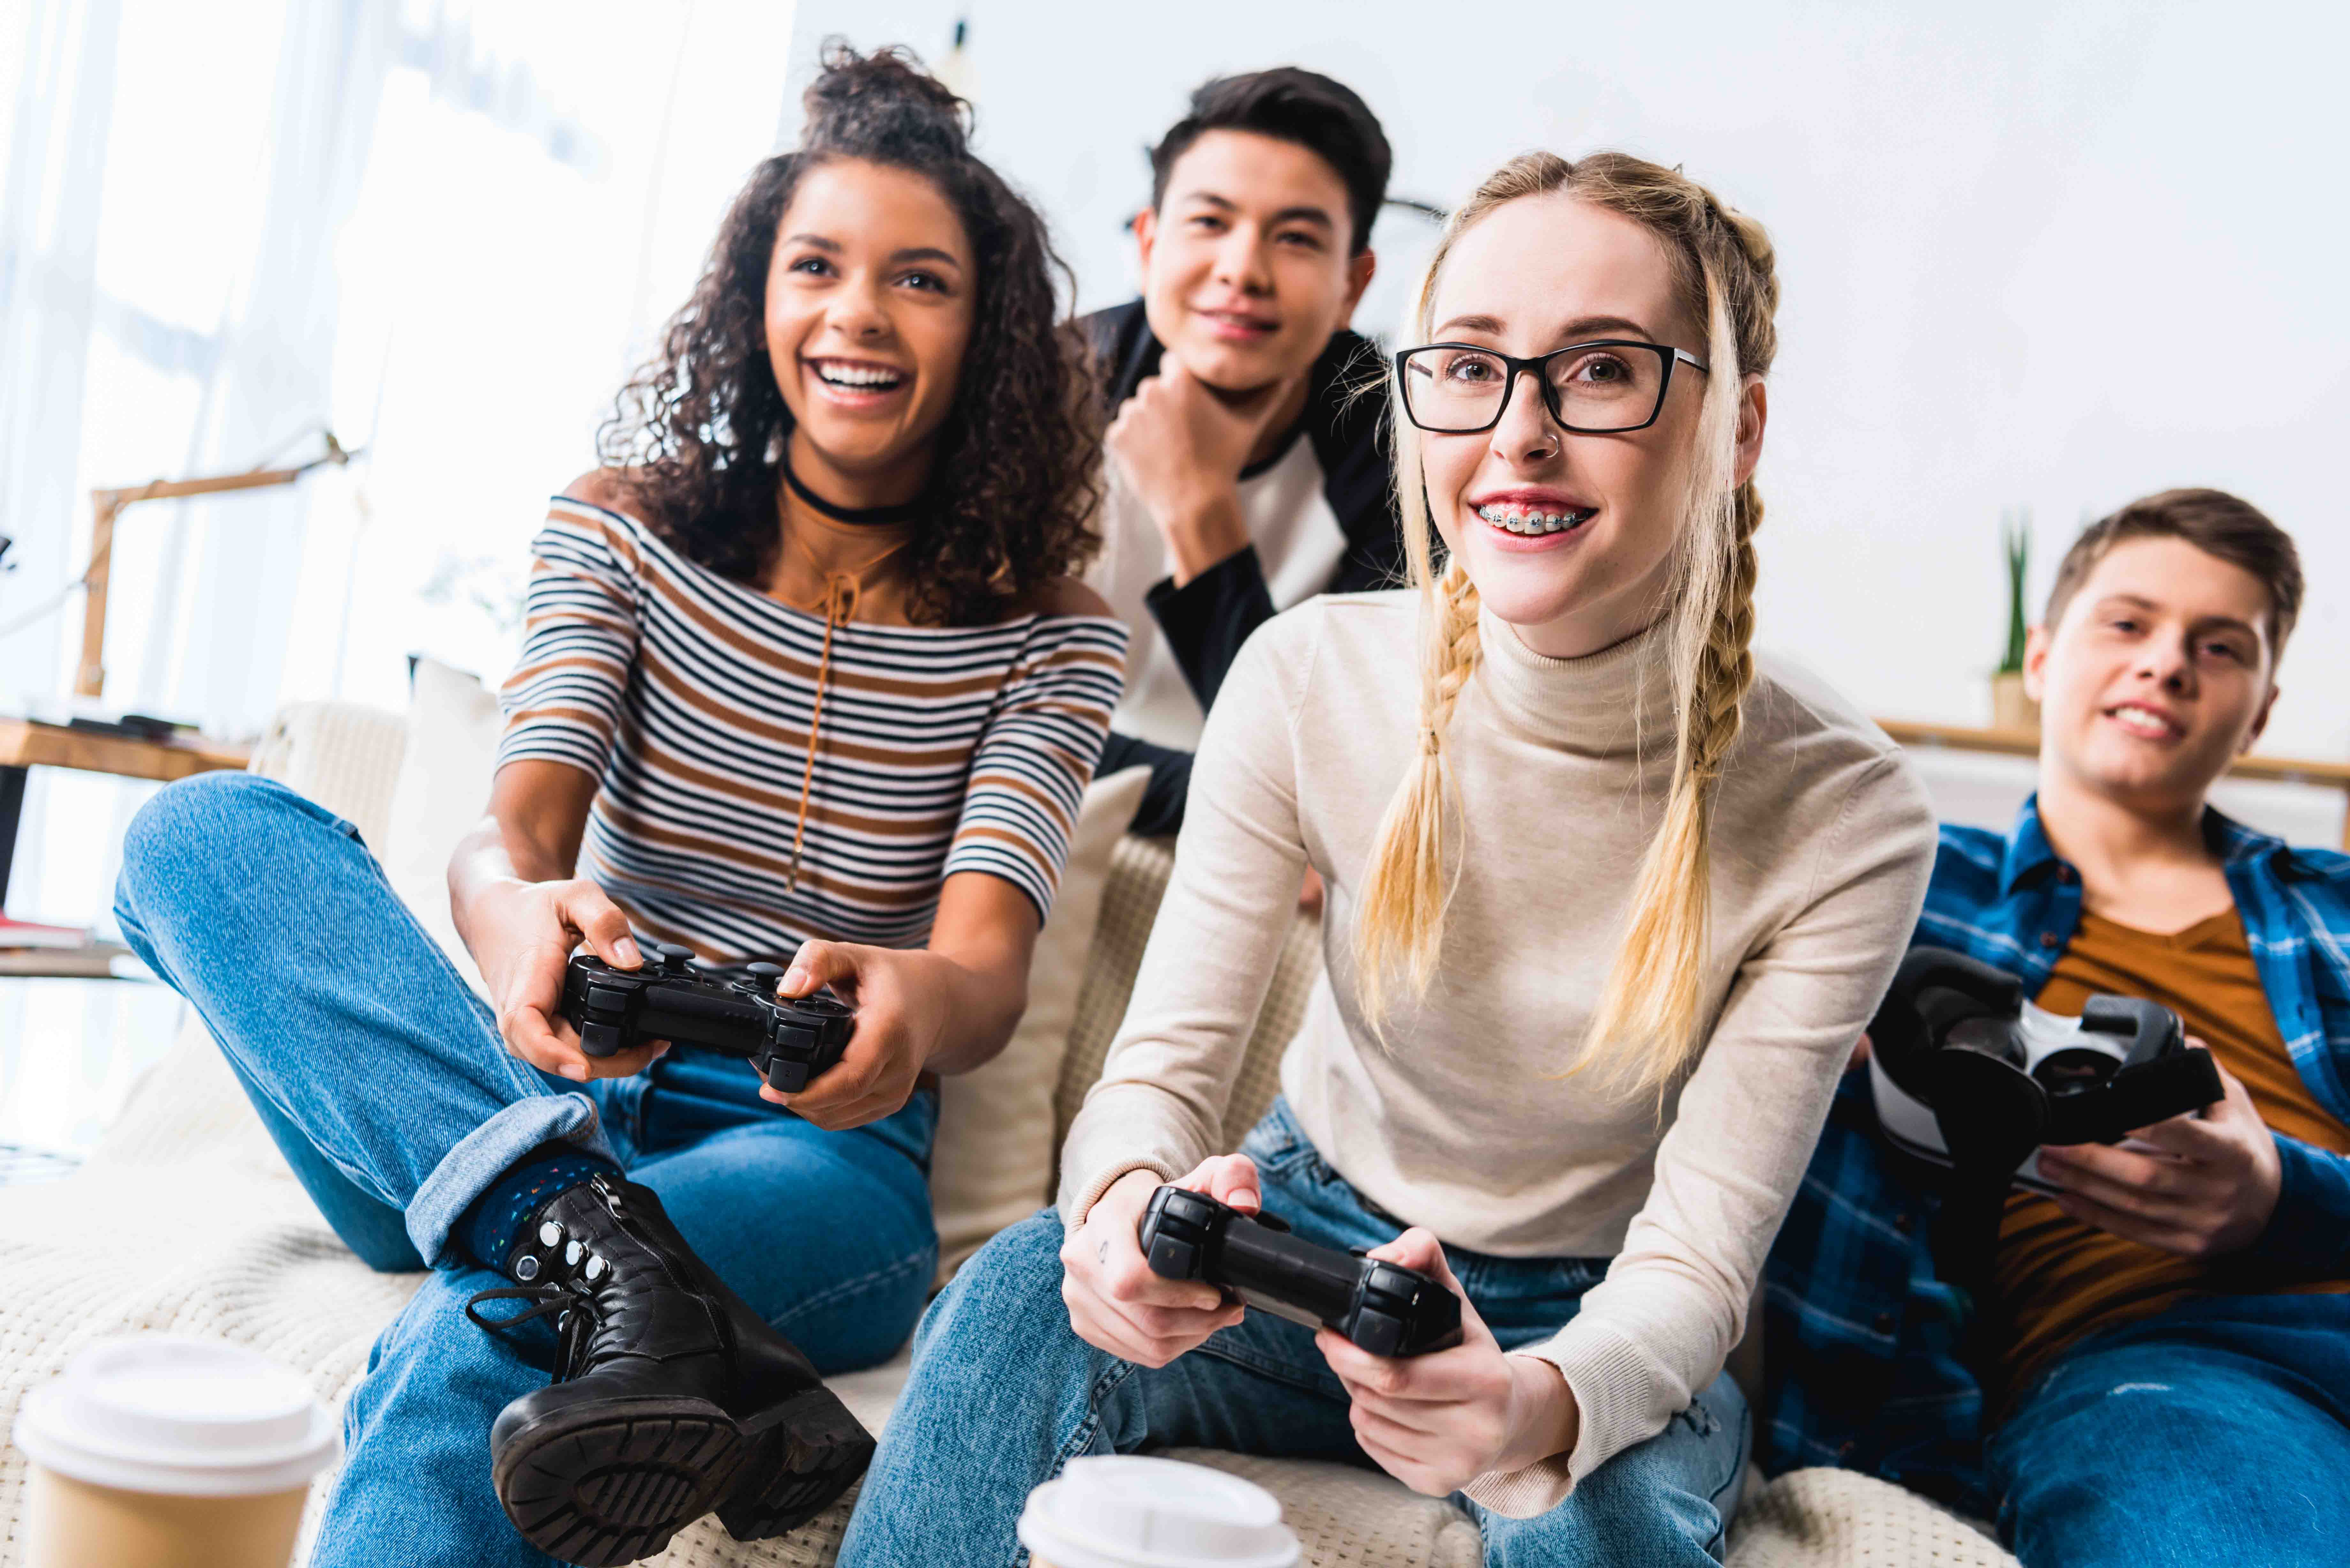 Over HALF of people who regularly play video games experience 'gamer rage